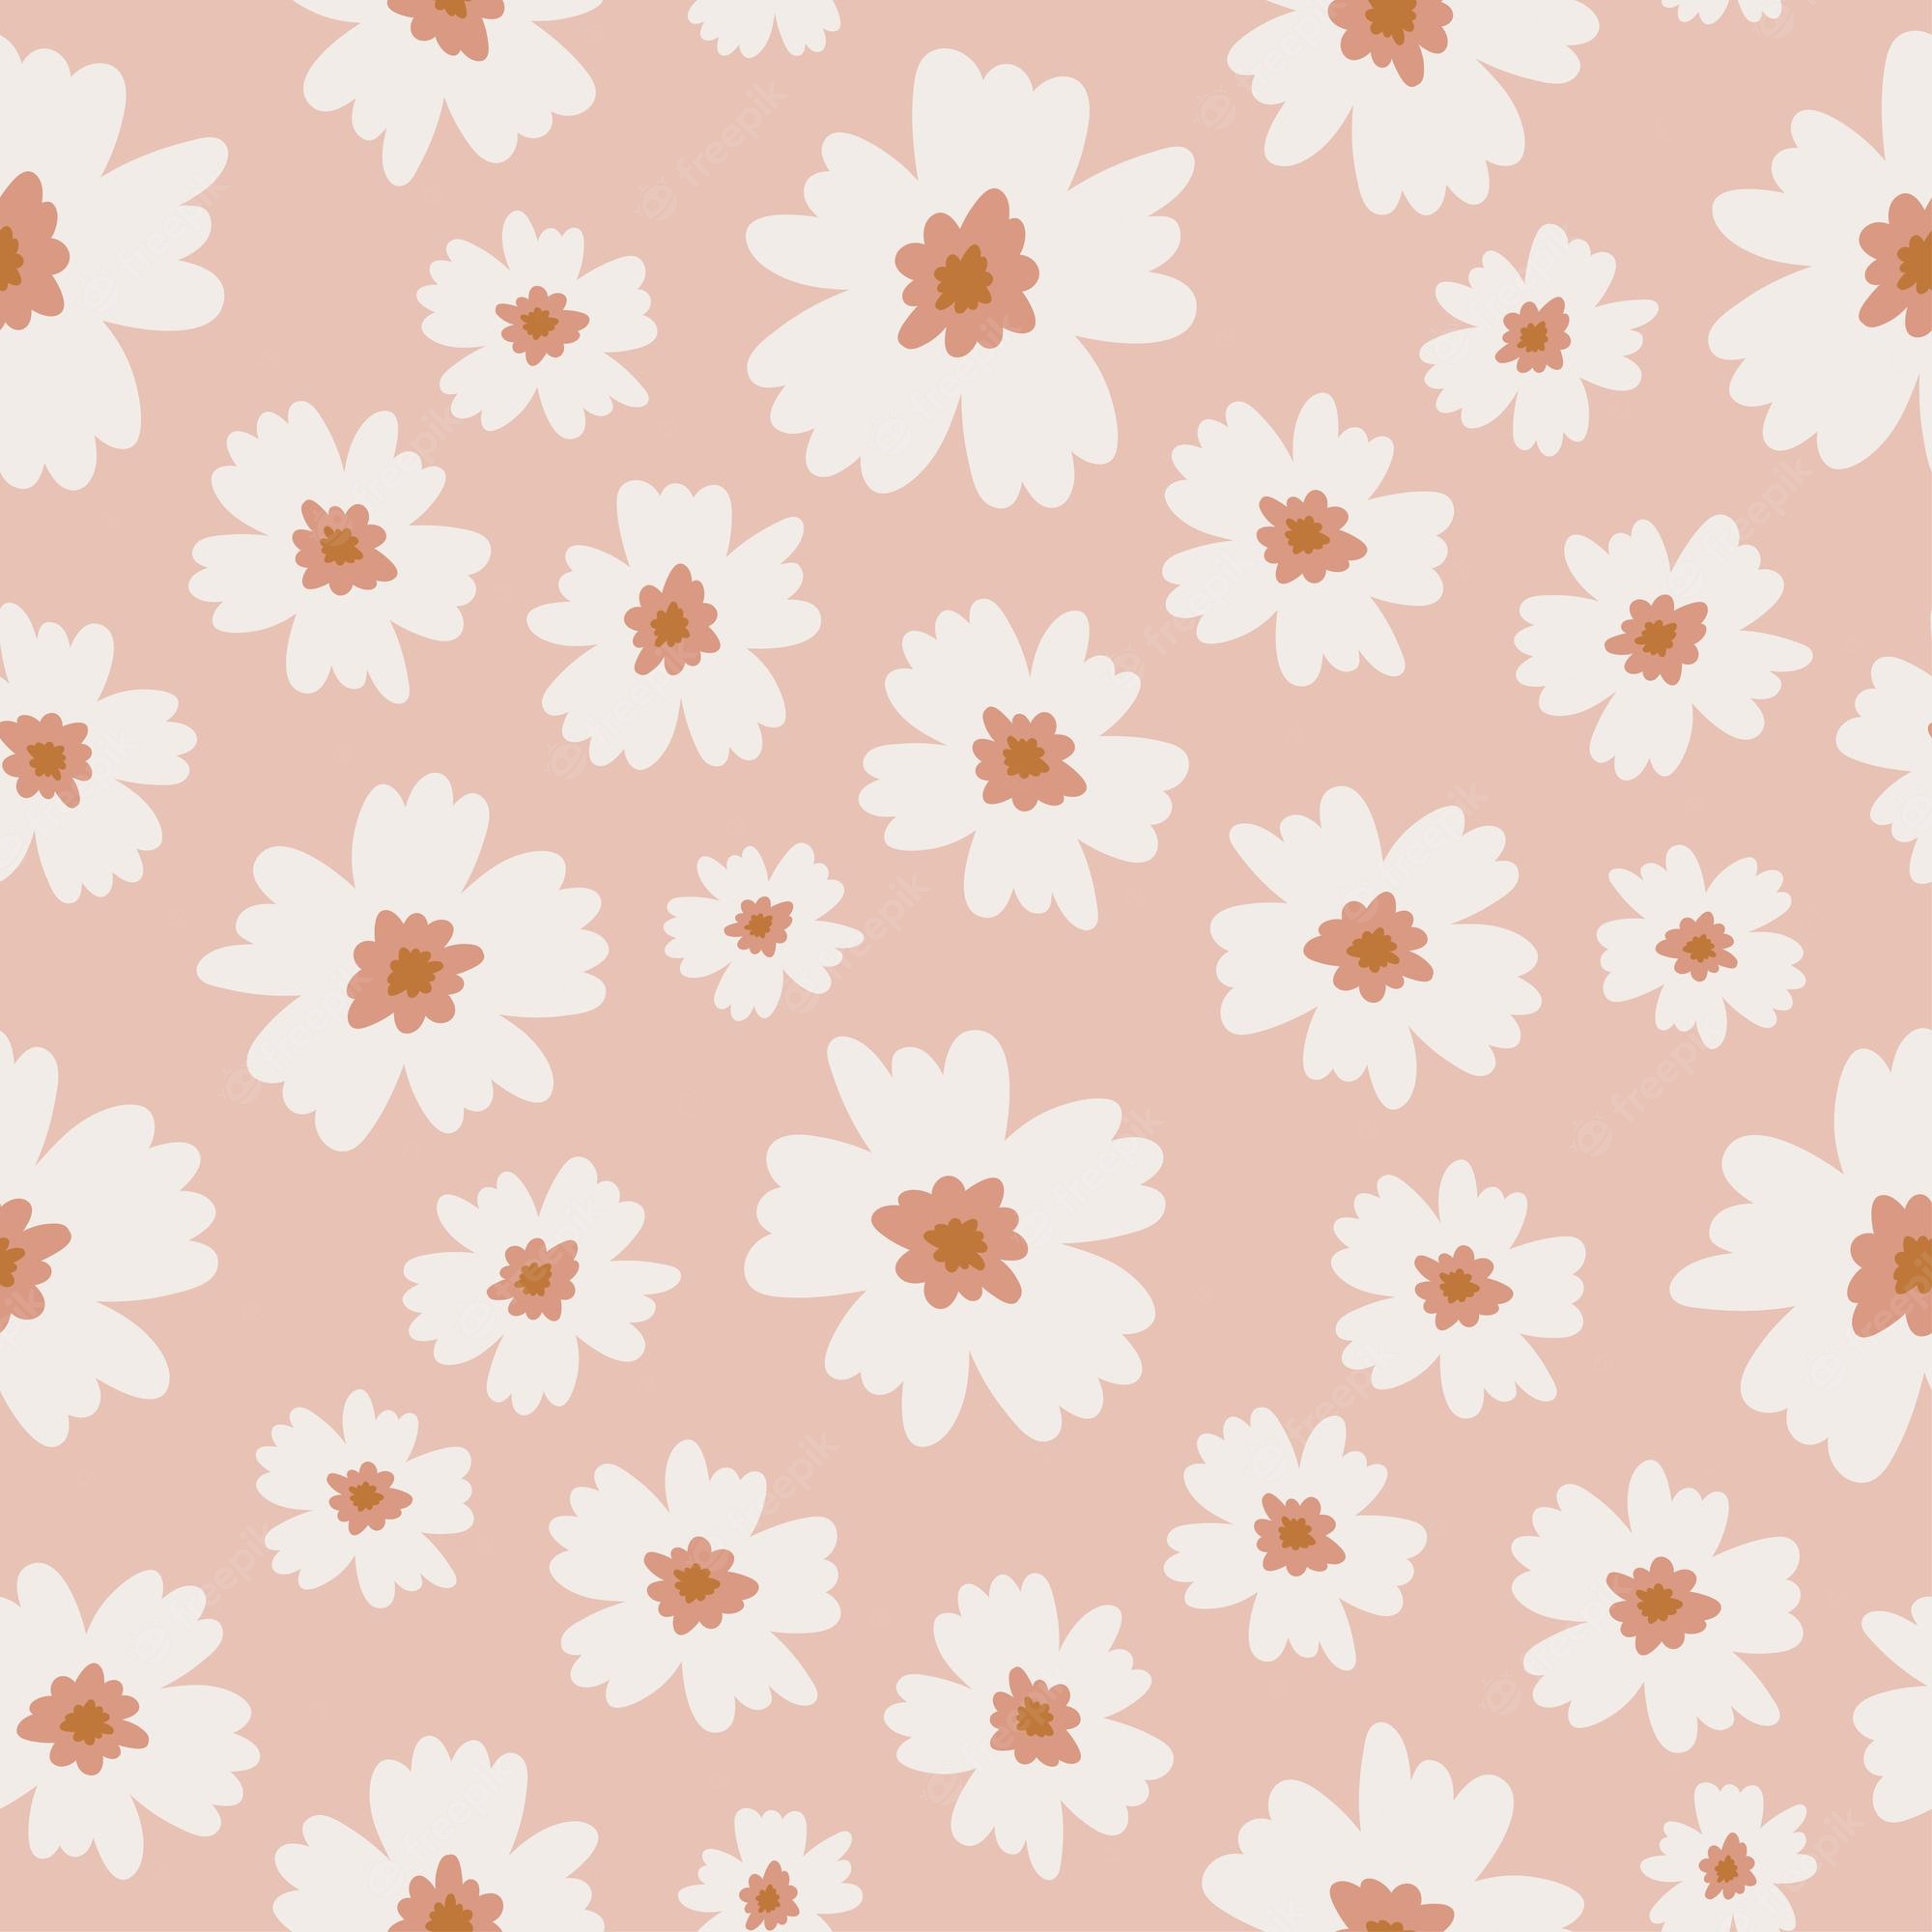 Premium Vector. Boho seamless pattern with white flowers and pink background